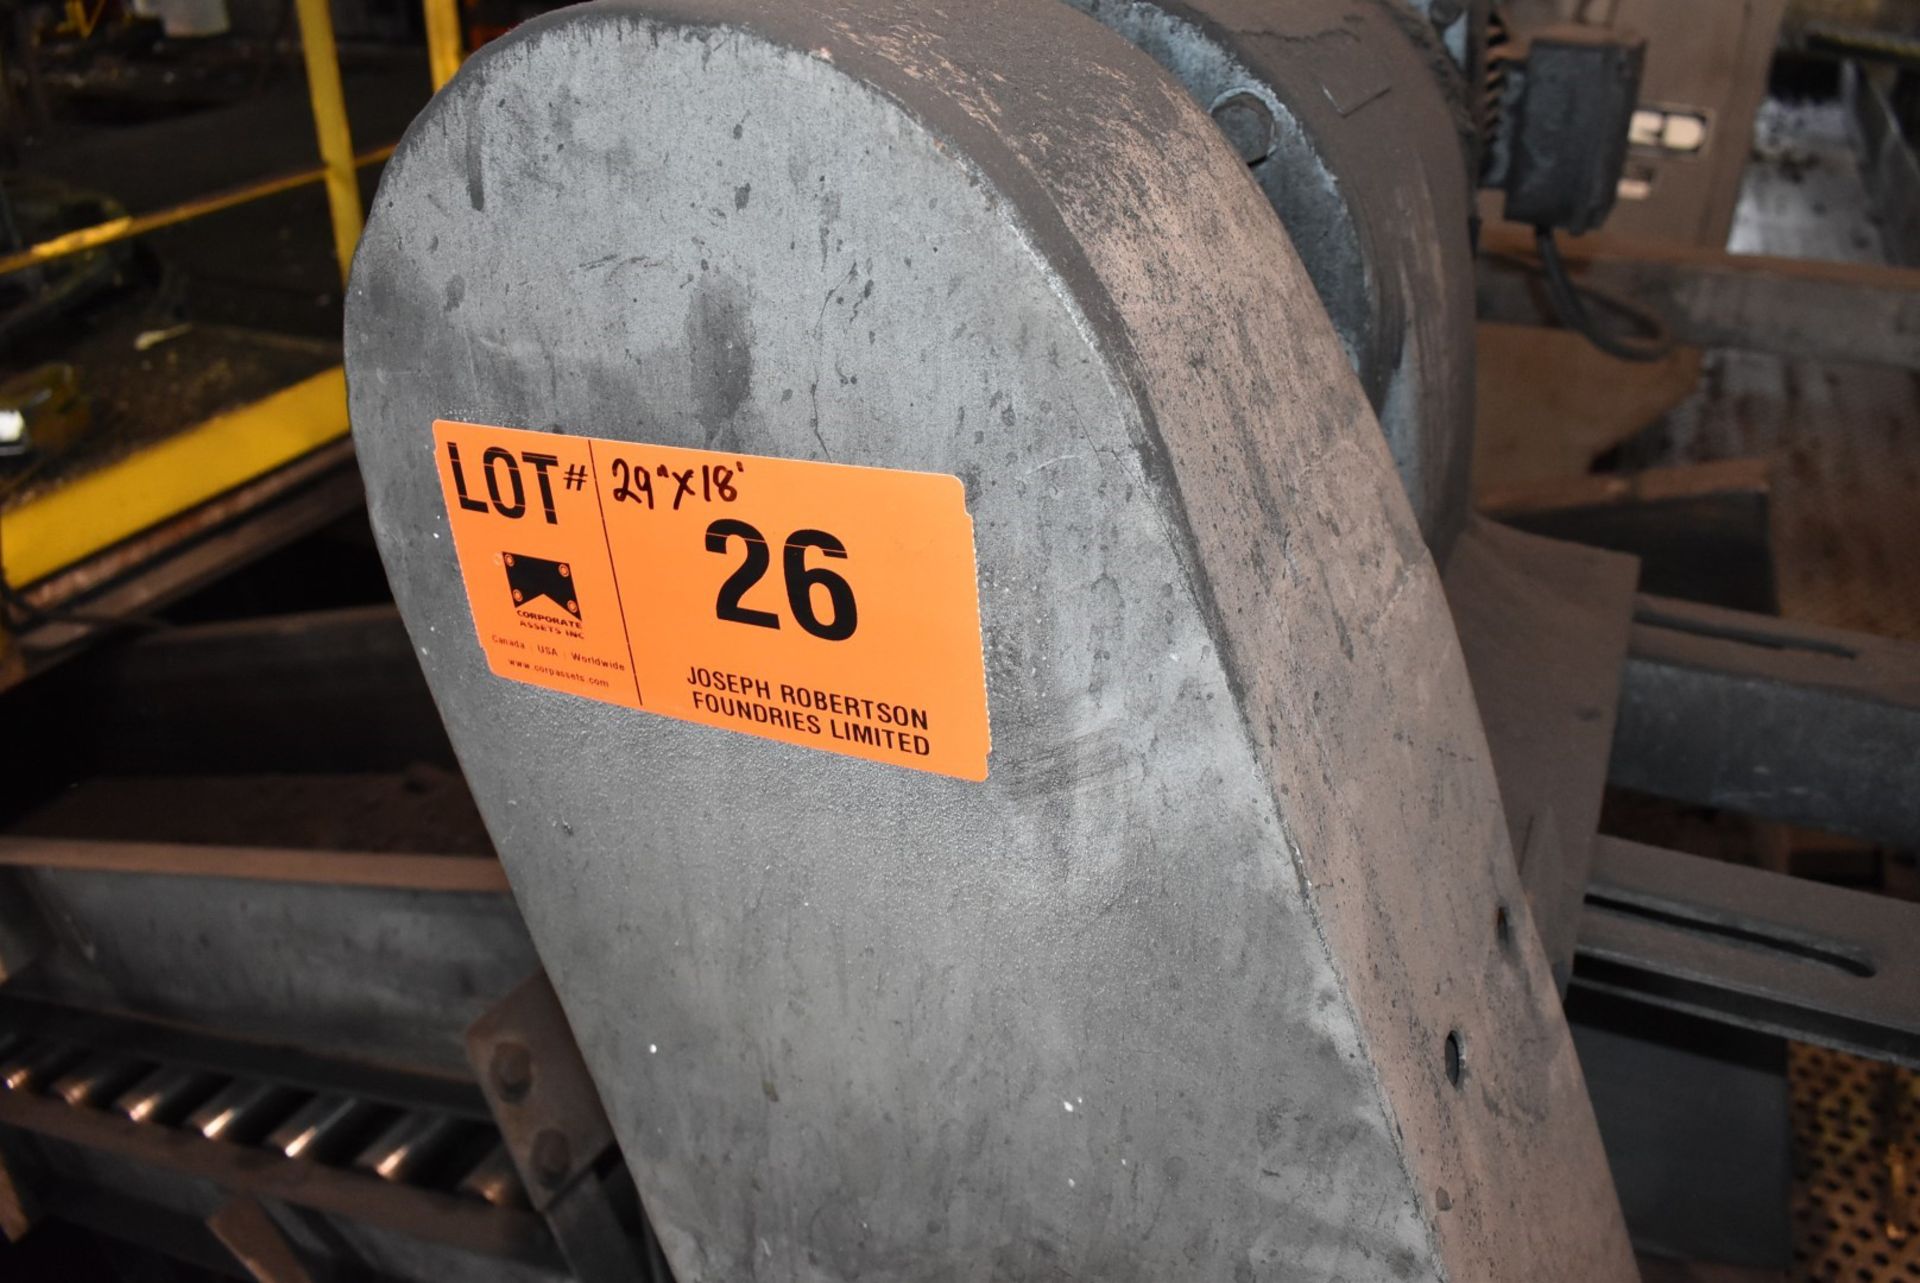 MFG UNKNOWN 29" X 18' INCLINED TRANSFER BELT CONVEYOR, S/N N/A (CI) [RIGGING FEES FOR LOT #26 - $620 - Image 7 of 7